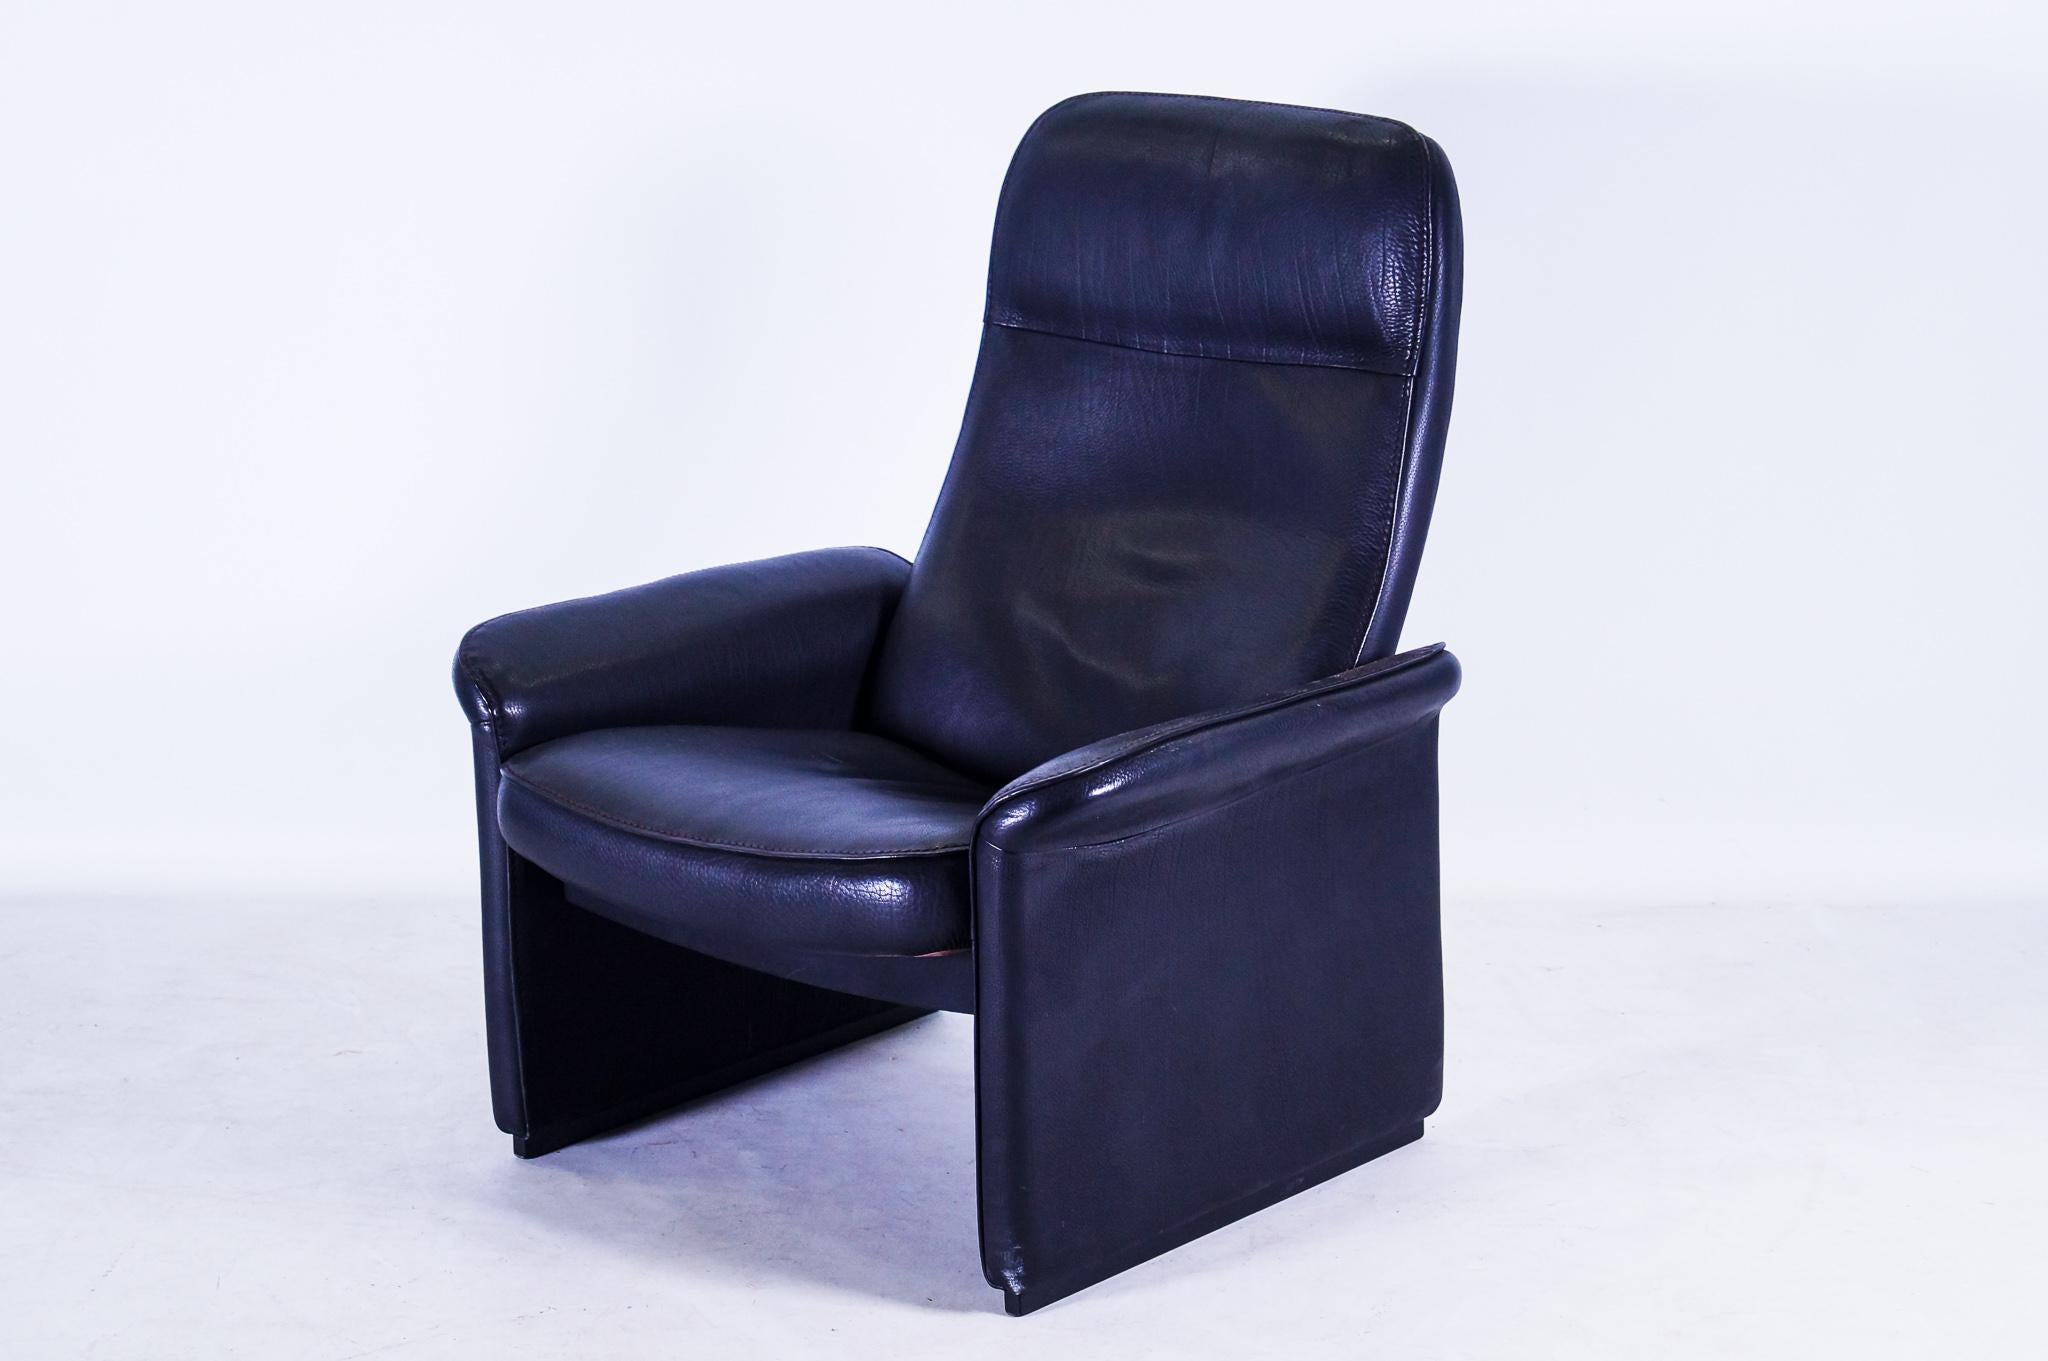 The DeSede armchair DS-55 is a stylish design from the collection of the Swiss brand De Sede. This brand is known for its extremely comfortable seating of a very high quality. This timeless armchair has an adjustable back and seat. DS-55 has a